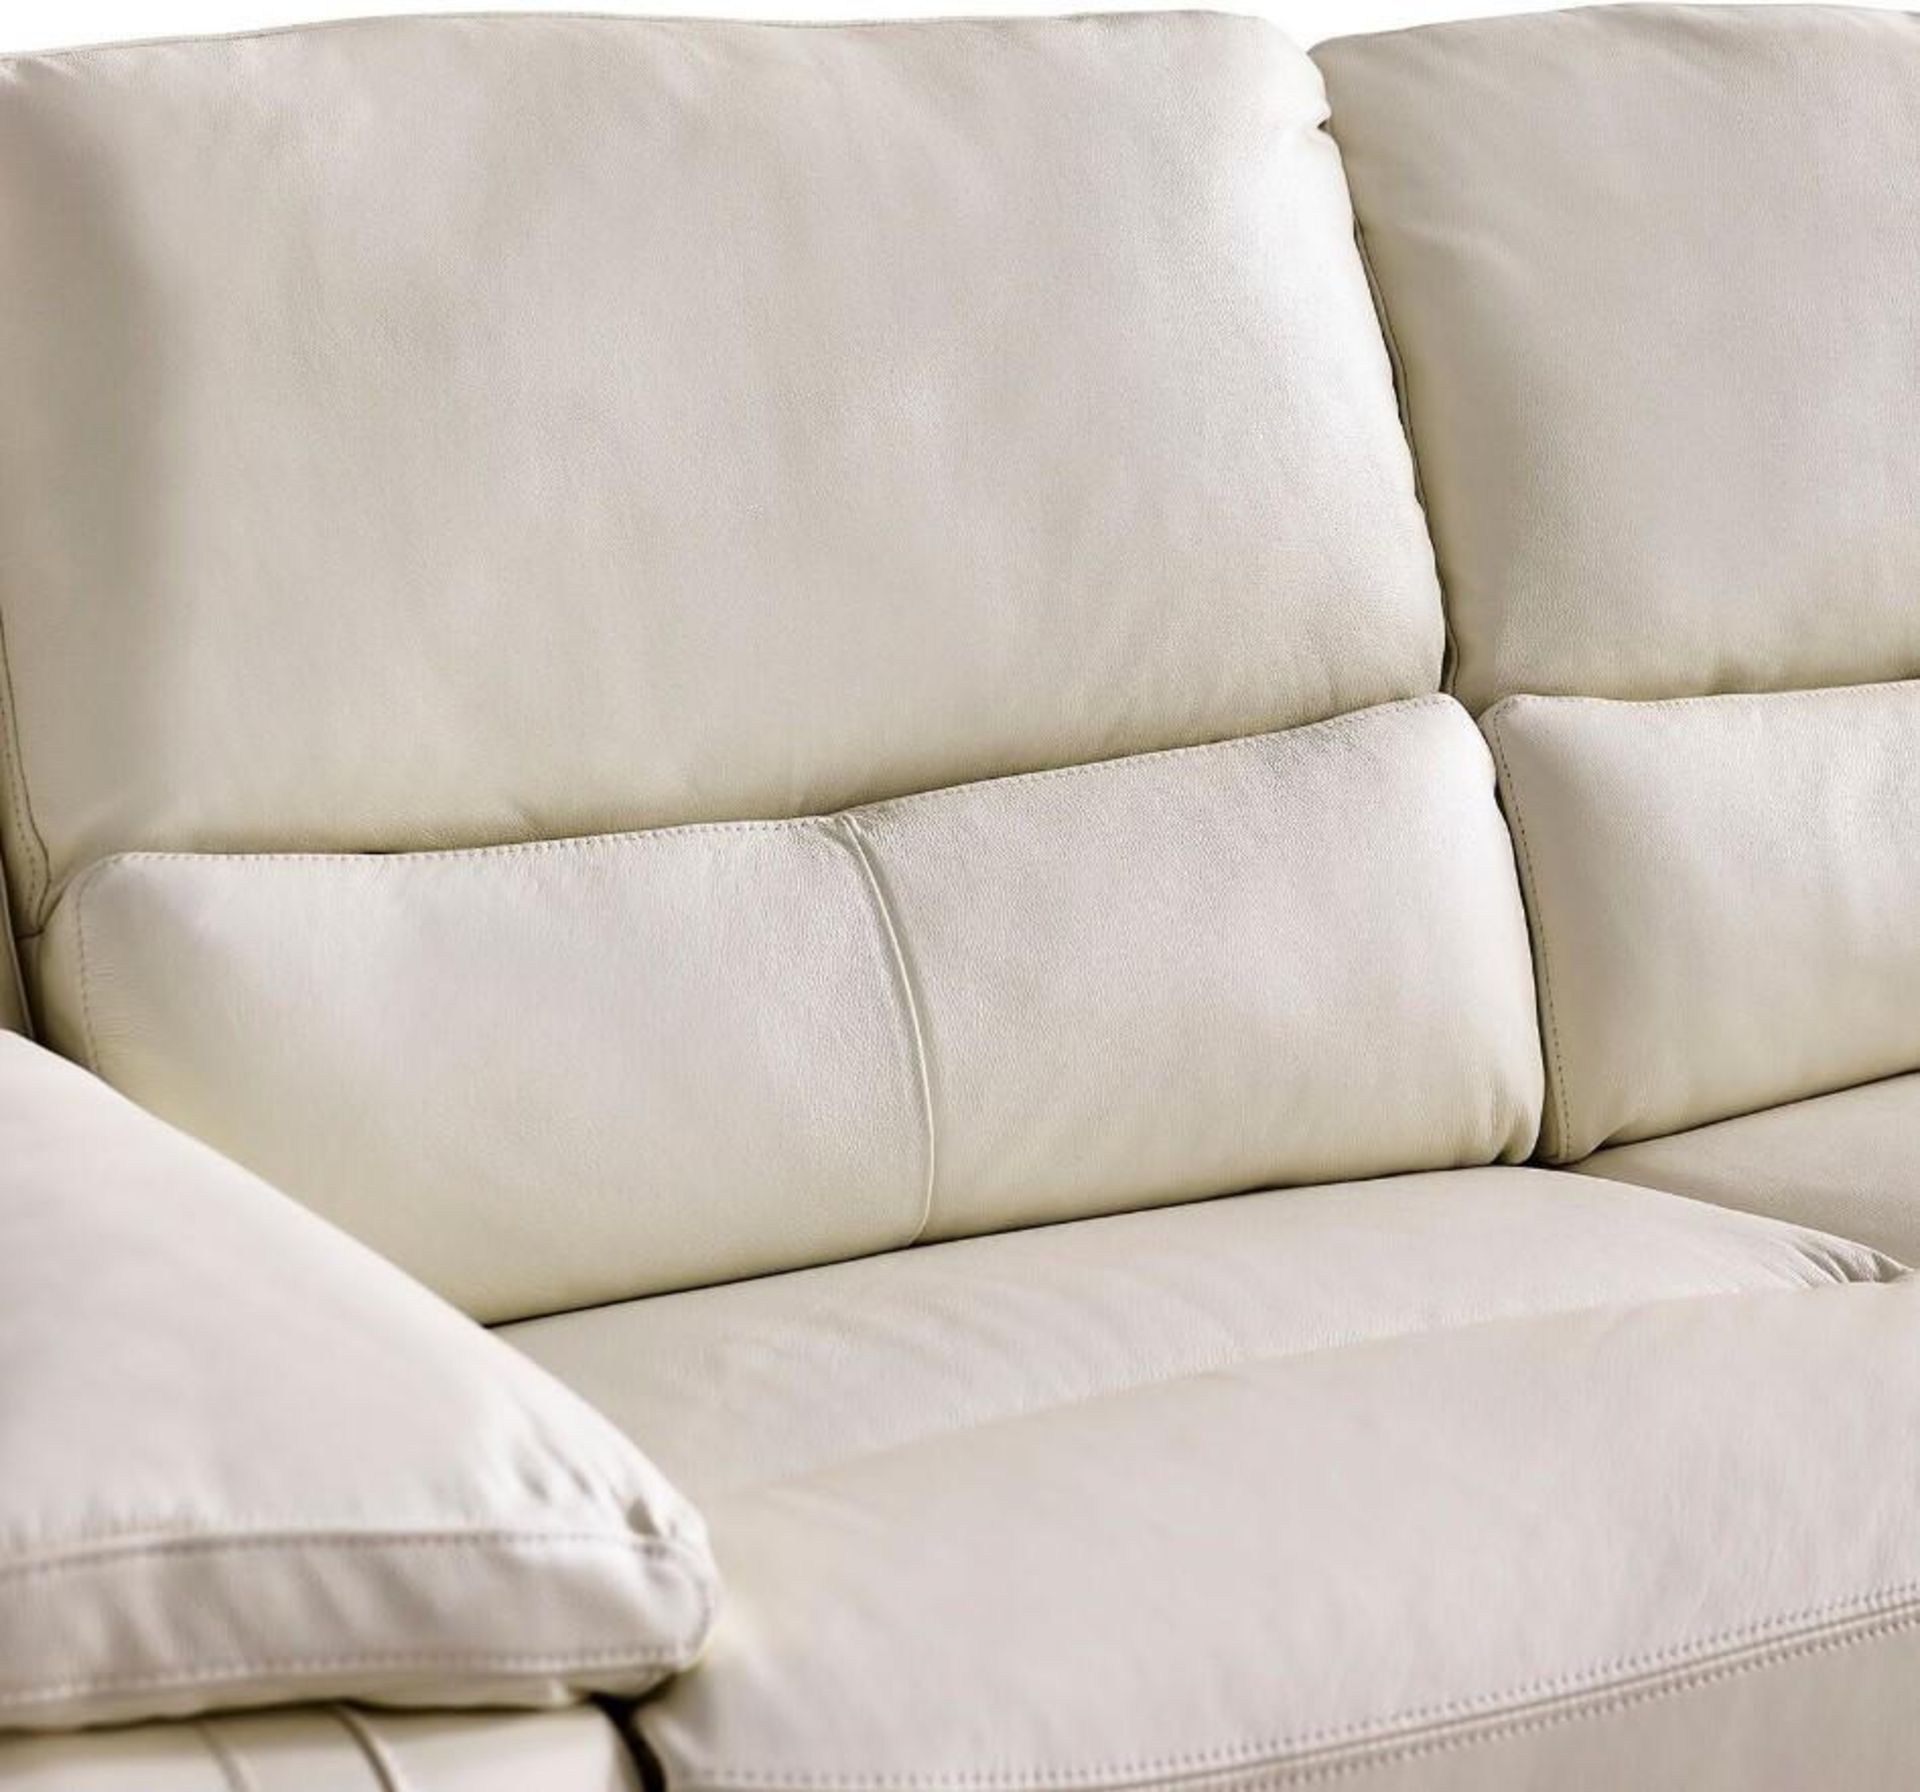 Brand new and boxed SCS Fallon 3 seater static sofa in Cream. - Image 2 of 2